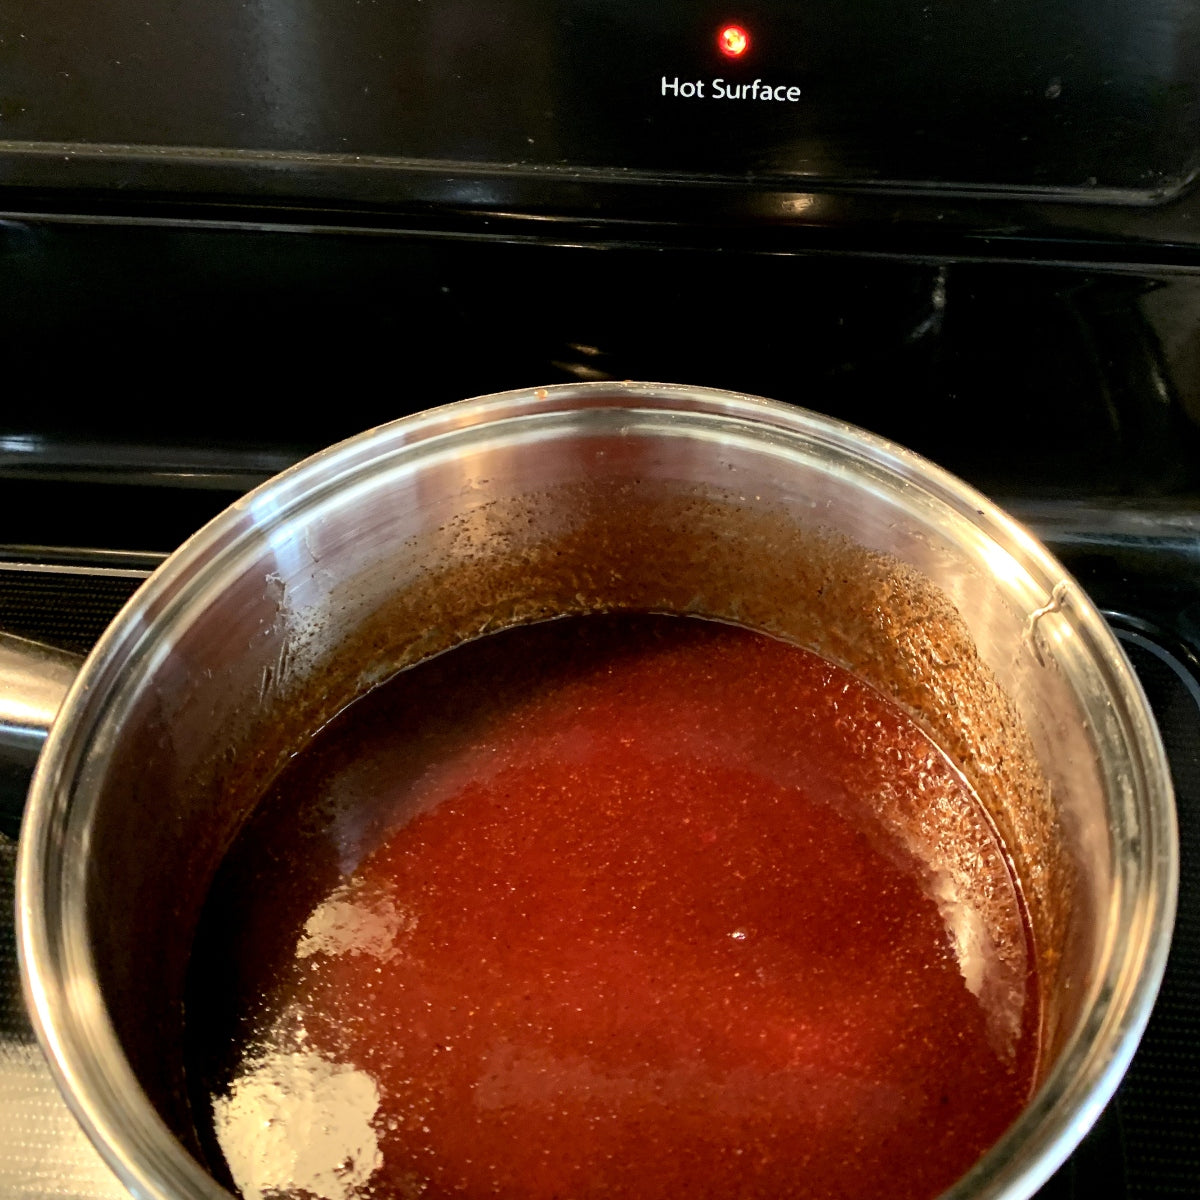 Honey chipotle sauce in a saucepan on the stove.